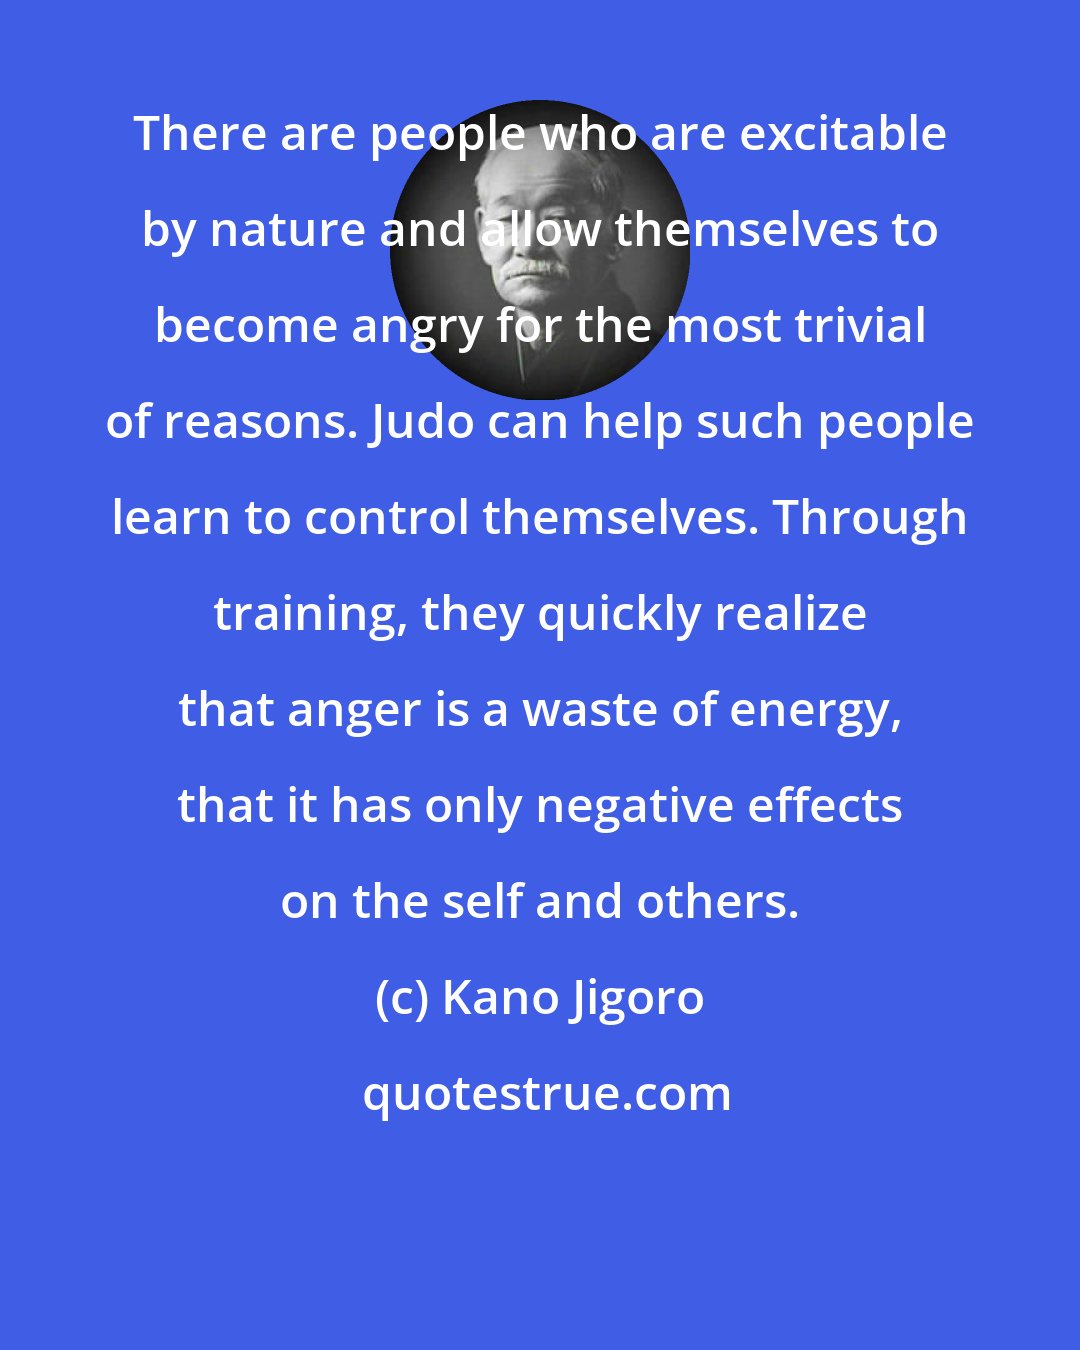 Kano Jigoro: There are people who are excitable by nature and allow themselves to become angry for the most trivial of reasons. Judo can help such people learn to control themselves. Through training, they quickly realize that anger is a waste of energy, that it has only negative effects on the self and others.